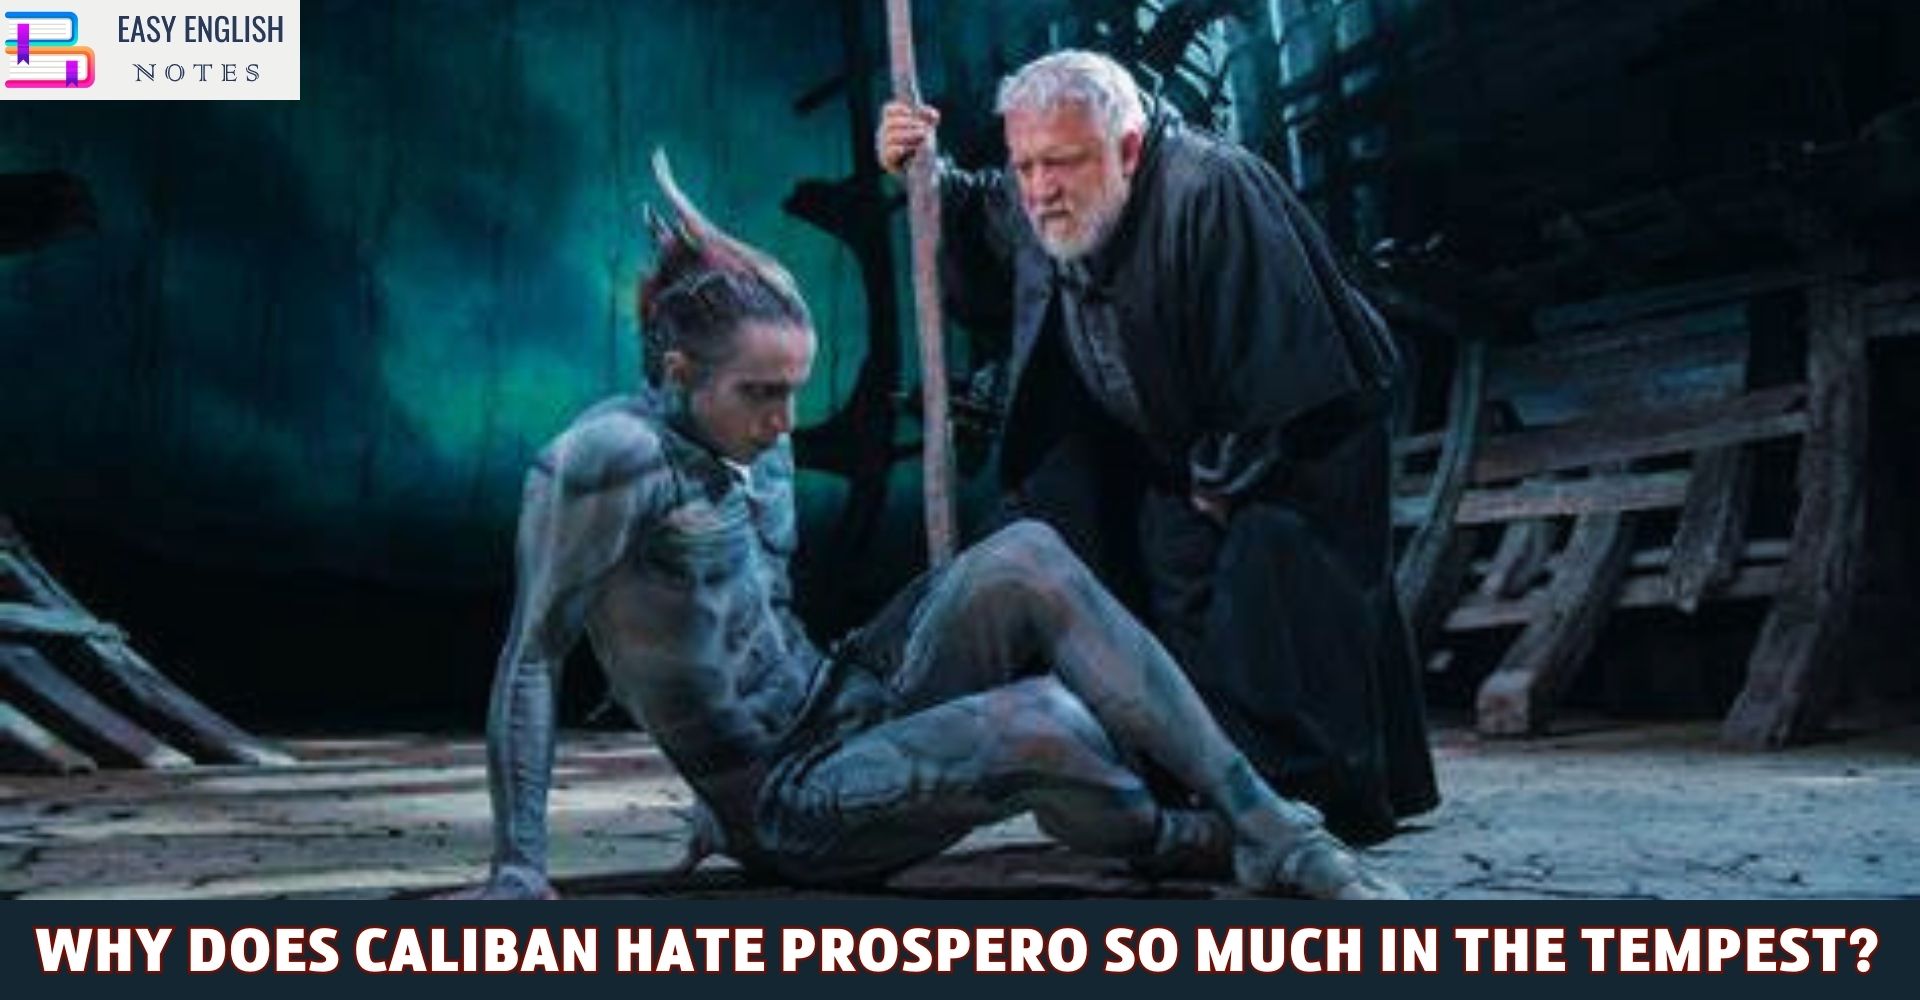 Why does Caliban hate Prospero so much in The Tempest?